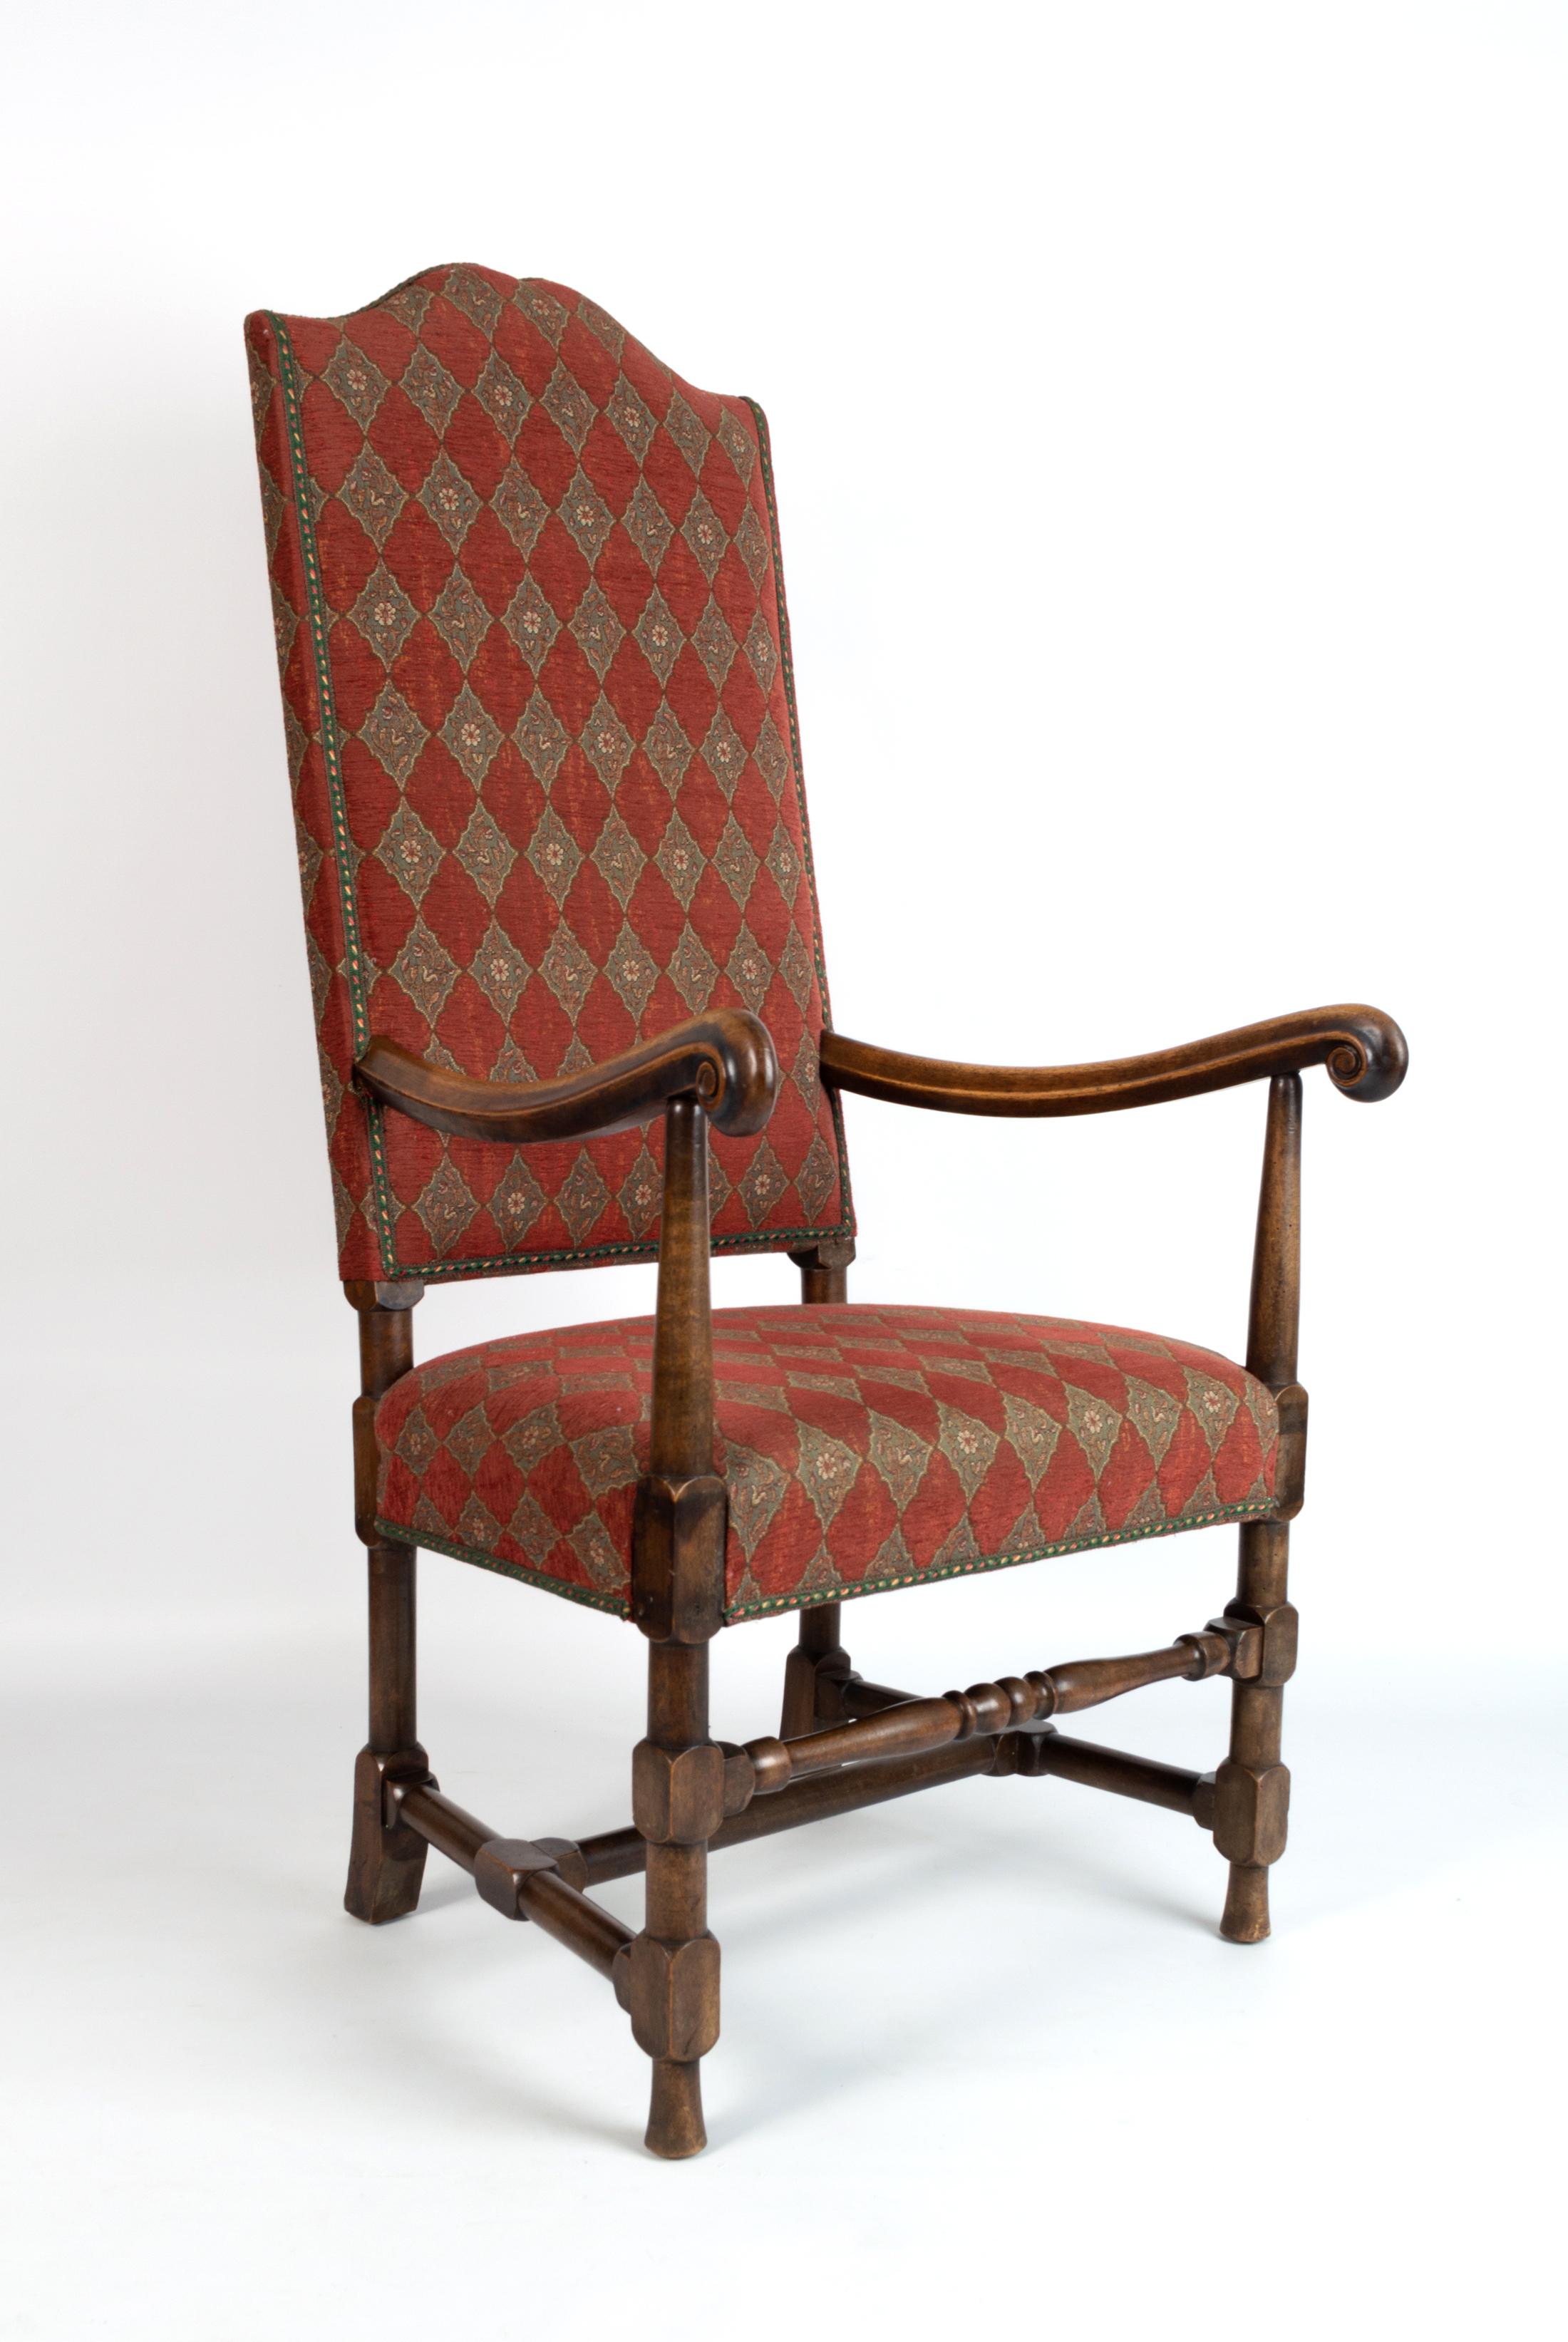 A CHARLES II STYLE MAHOGANY HIGH BACK ELBOW CHAIR,
ENGLAND, 19TH CENTURY.

Humped back, upholstered to the back and seat in red fabric with a lozenge design, the arms of scrolling form, the legs joined by stretchers.
In excellent condition